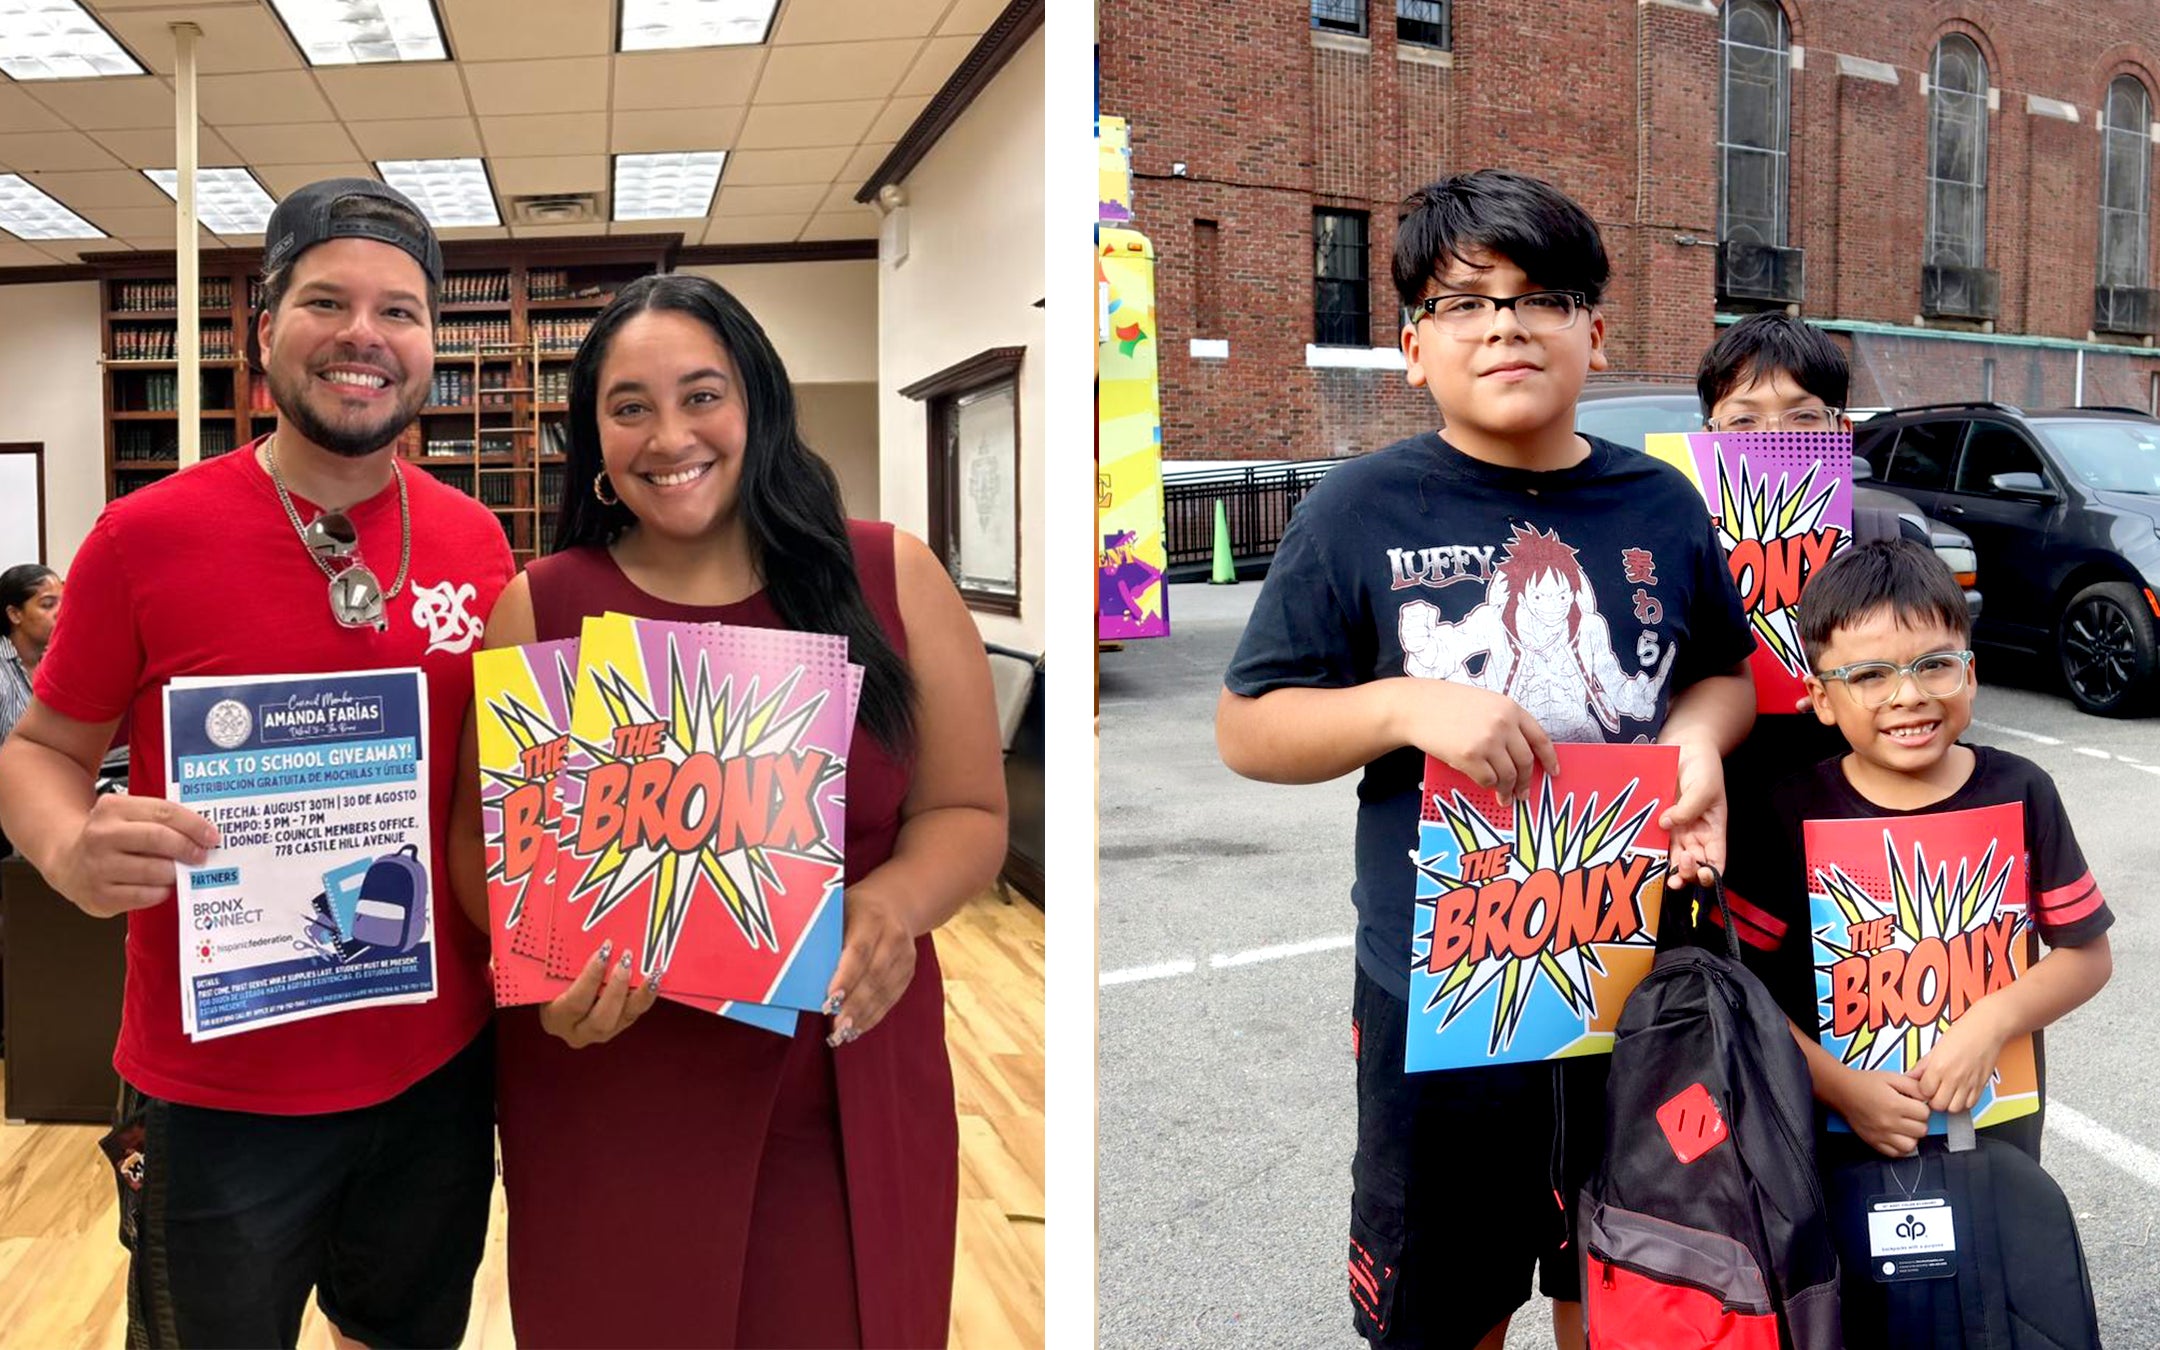 PICTURED (From L to R): Anthony Ramirez II with Council Member Amanda Farías, Local Students with Bronx POW! Folders